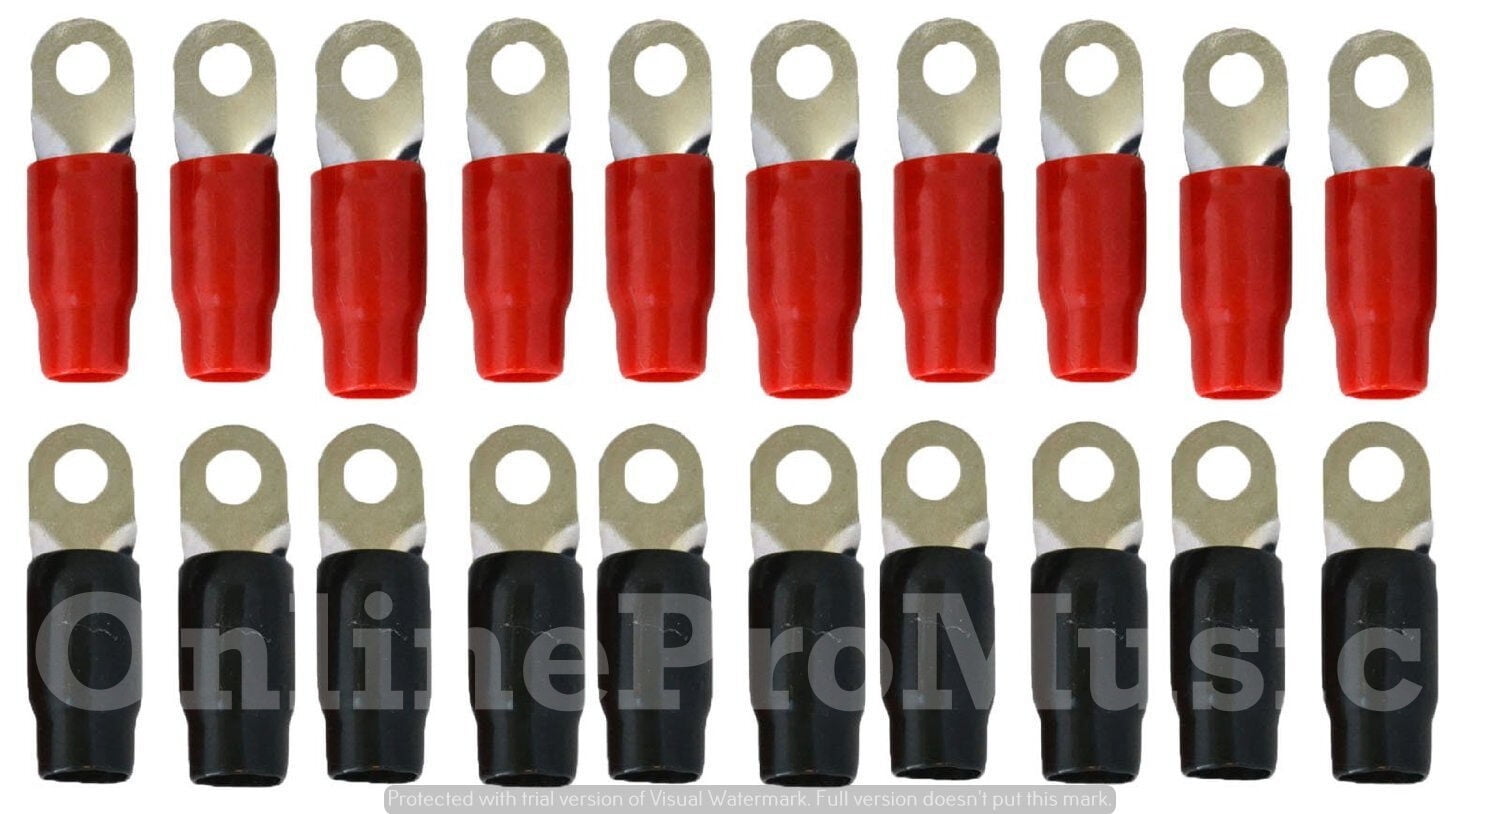 0 Gauge Gold Ring Terminal 80 Pack 1/0 AWG Wire Crimp Red Black Boots 5/16 